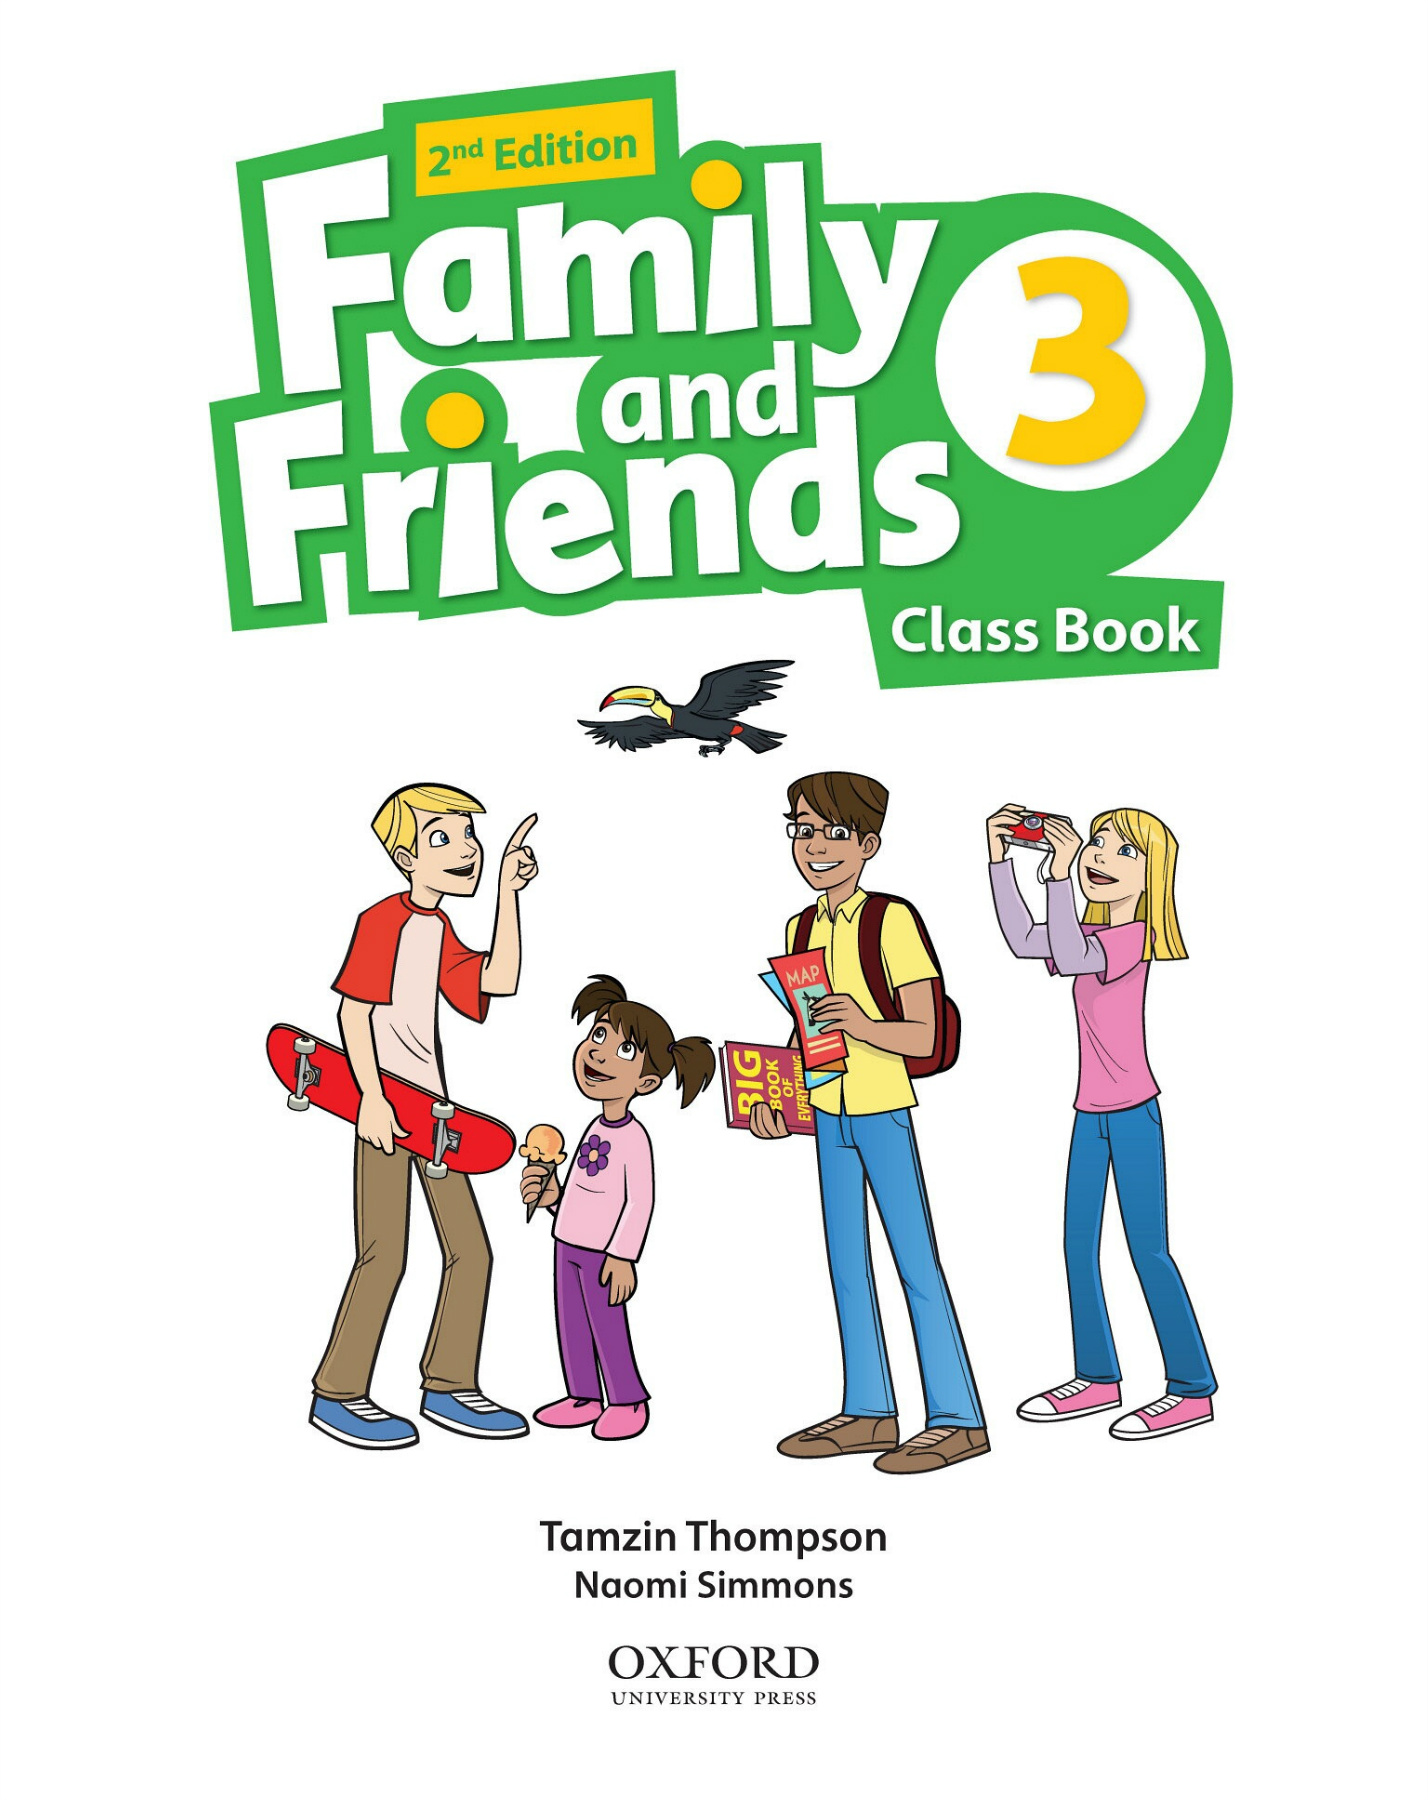 Friends 3.3. Английский Family and friends 3. Family and friends 2nd Edition class book Wildberries. Family and friends 3 (2nd Edition) Classbook. Учебник Family and friends 3.